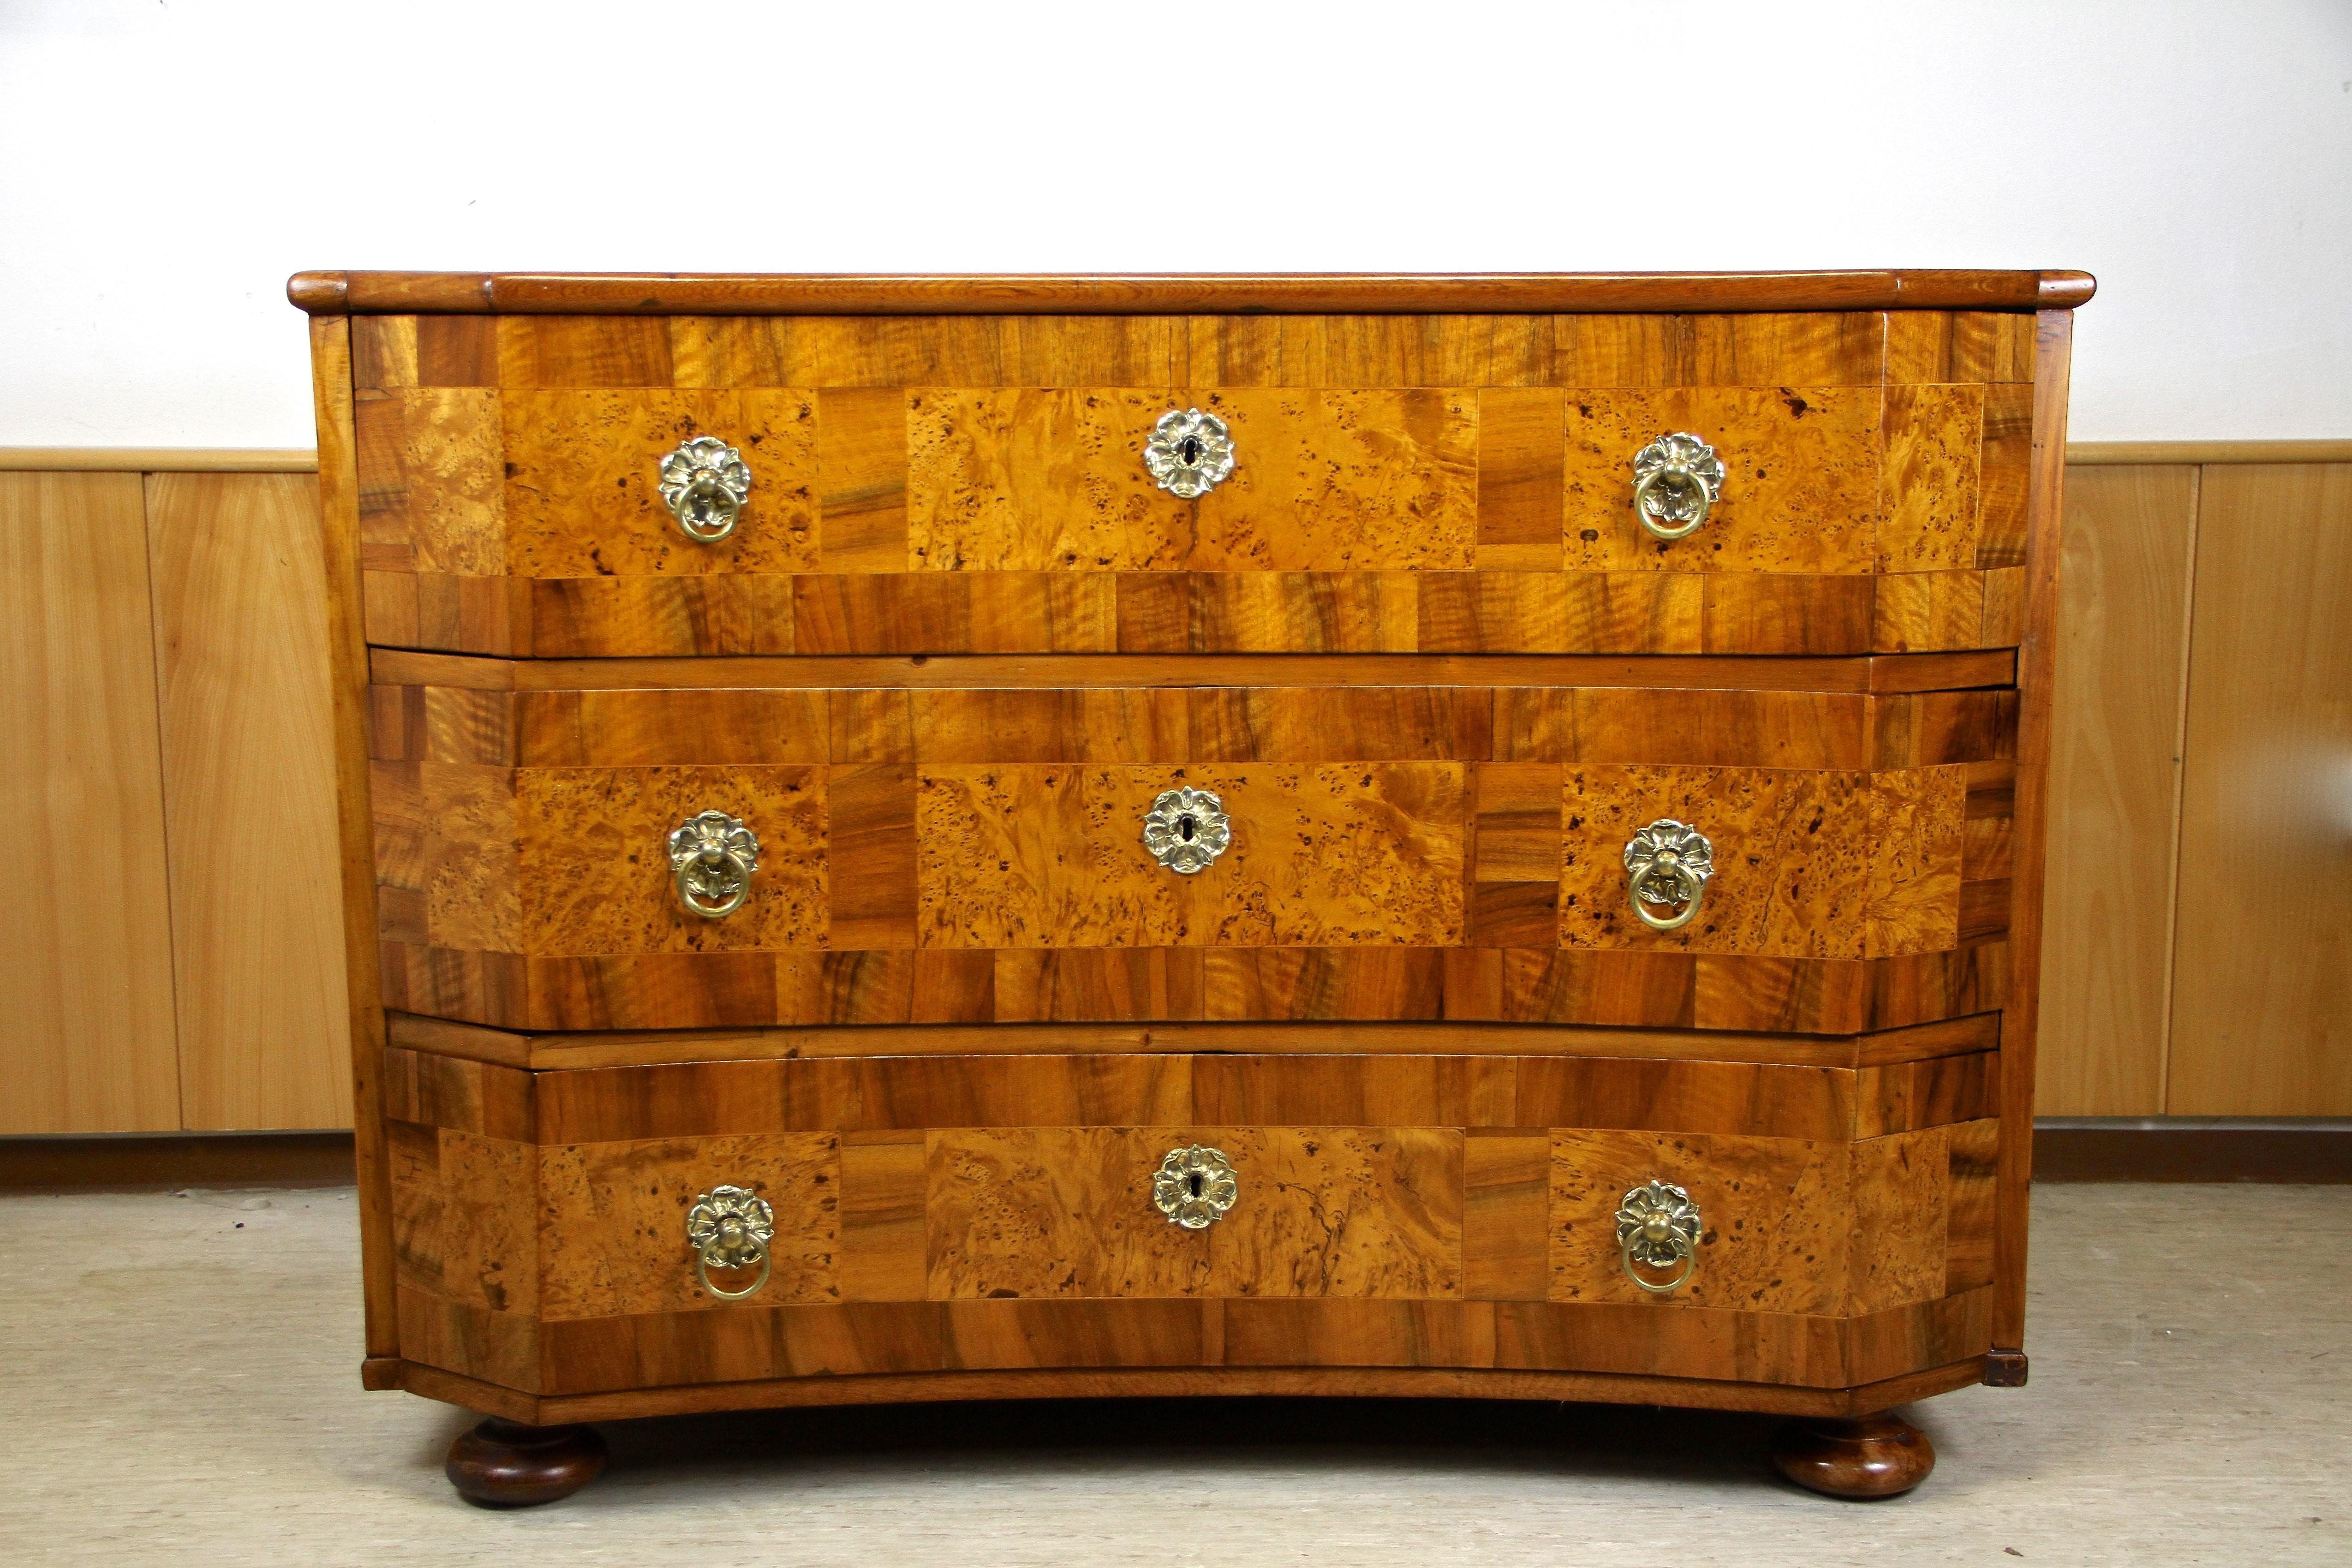 Polished 18th Century Baroque Chest of Drawers, Austria, circa 1760